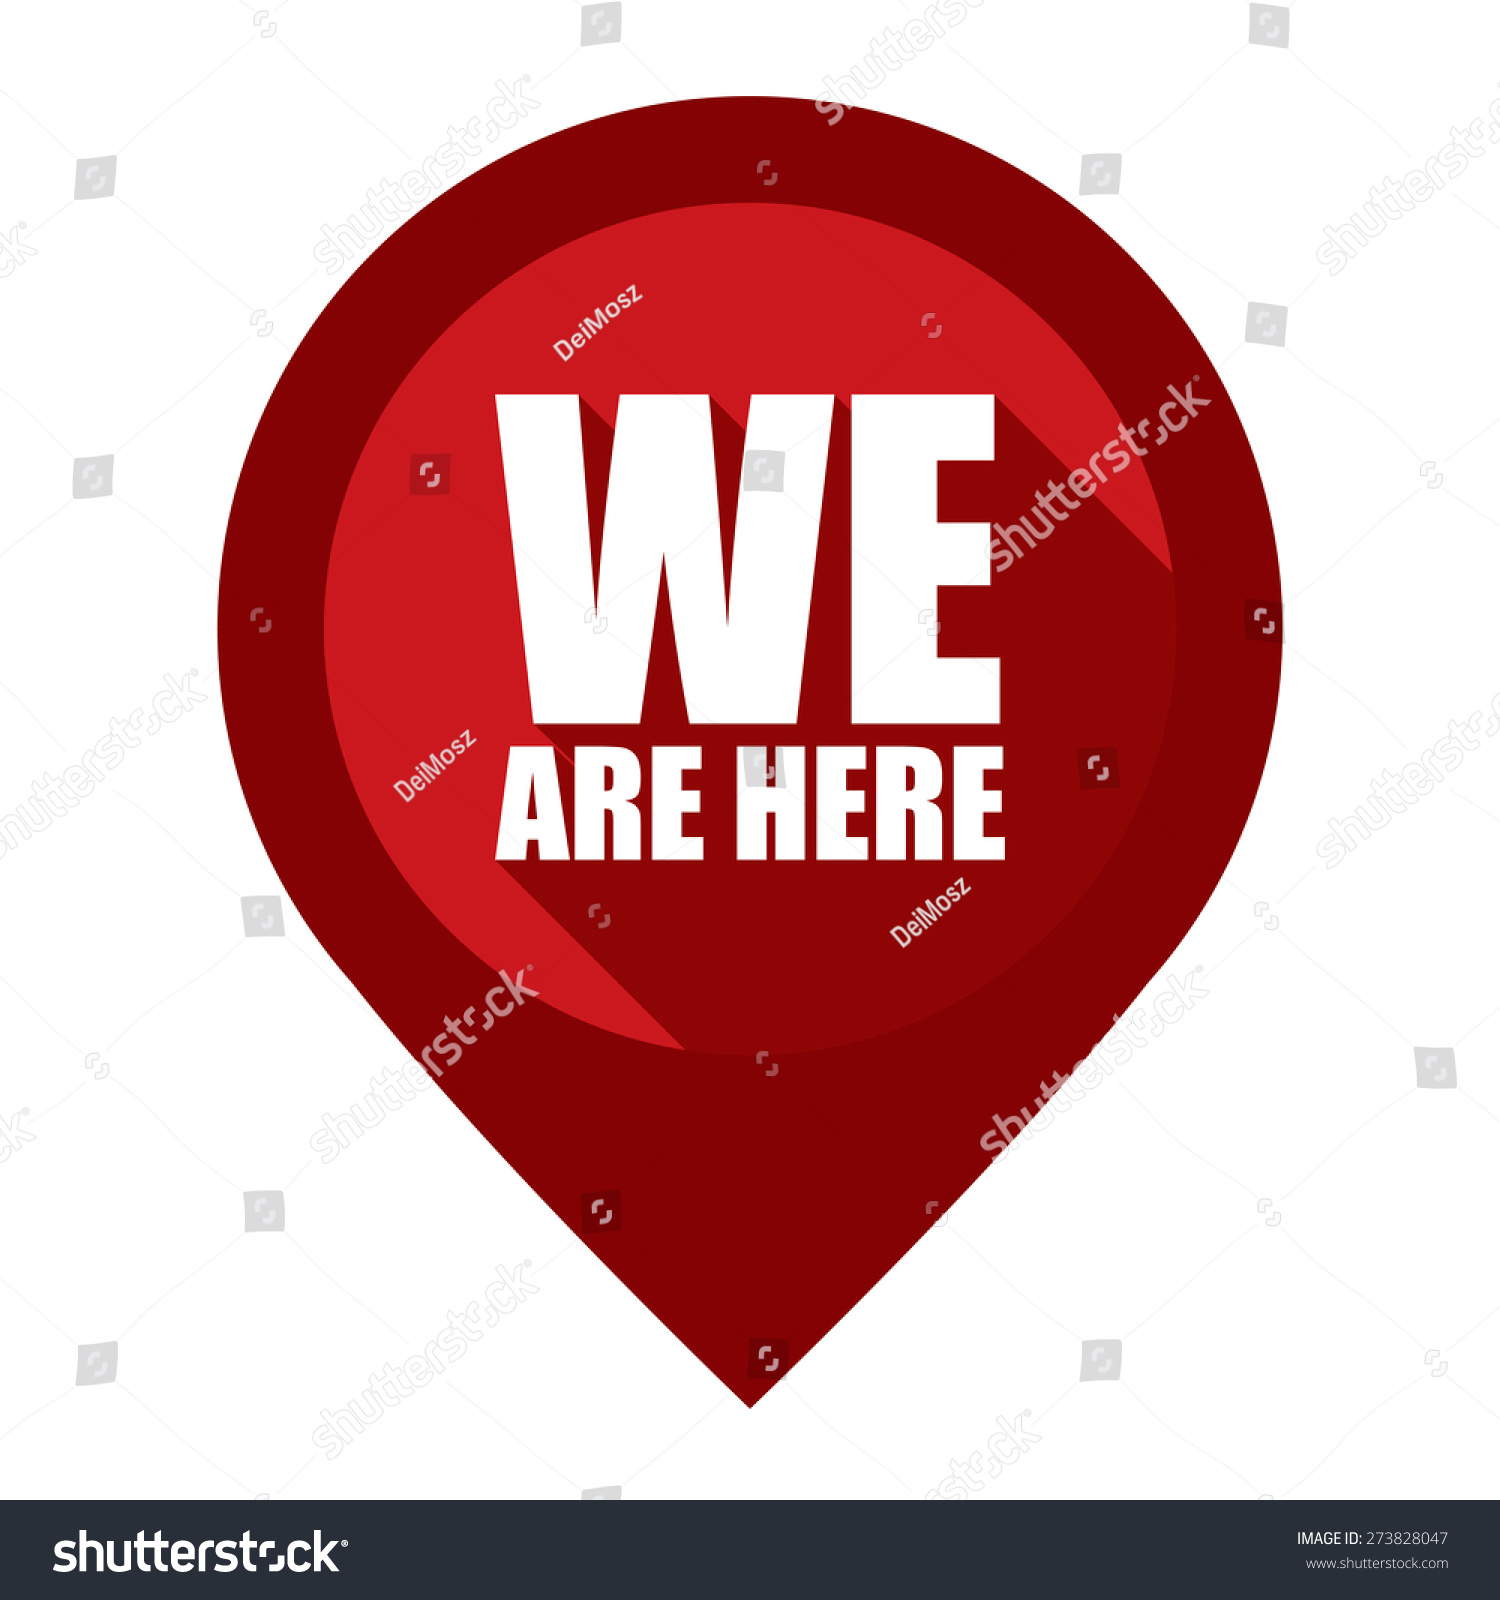 clipart you are here - photo #15